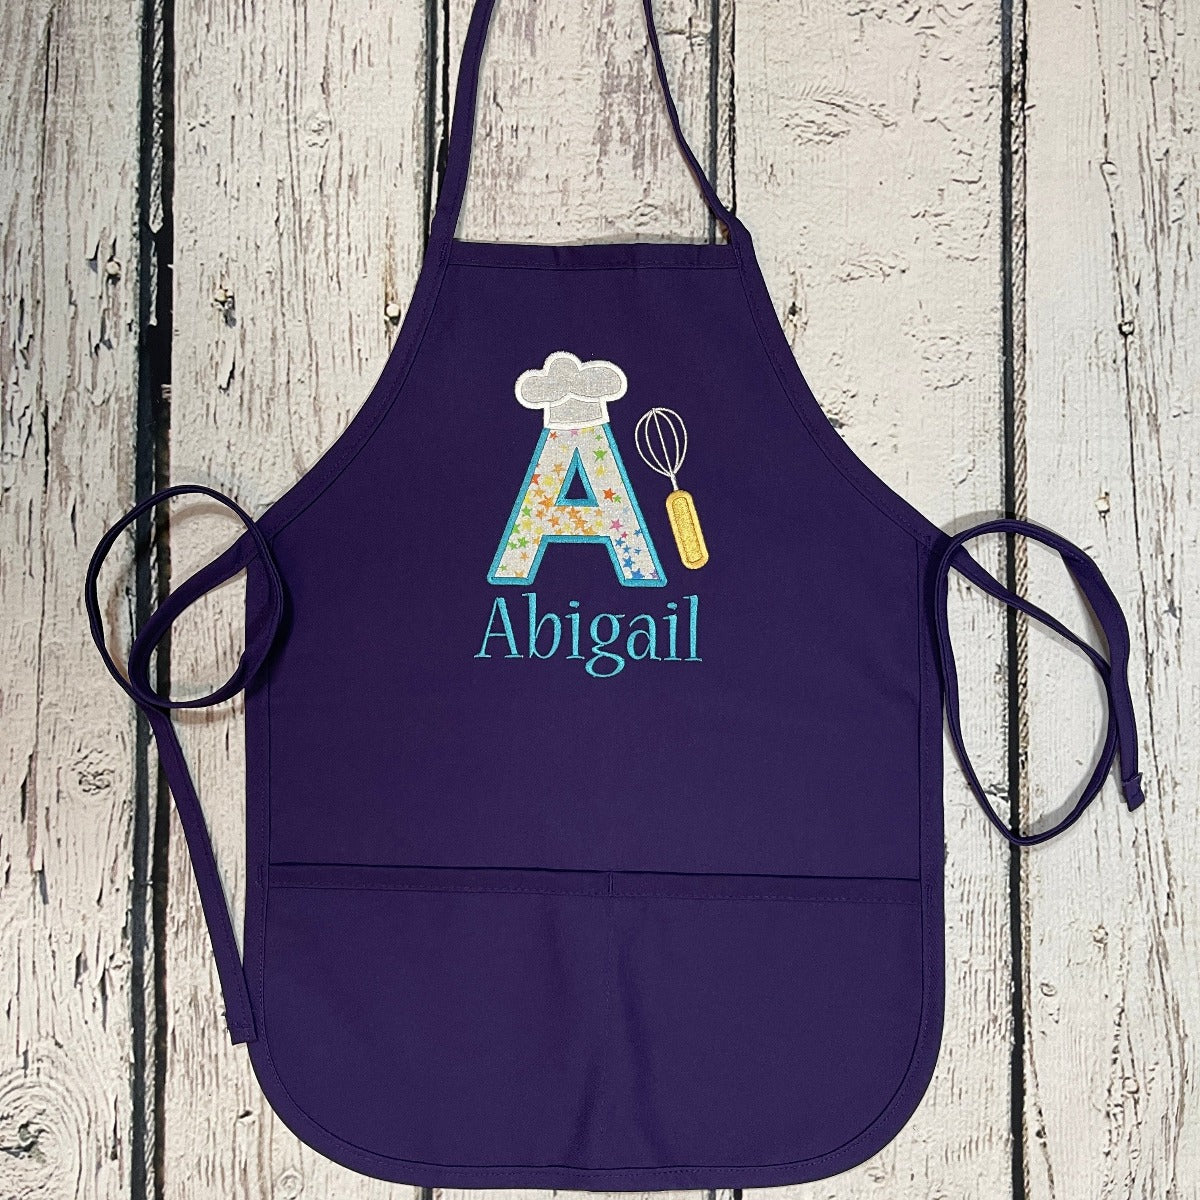 Kids Personalized Embroidered Apron with Glitter Stars Fabric Large Initial & Name